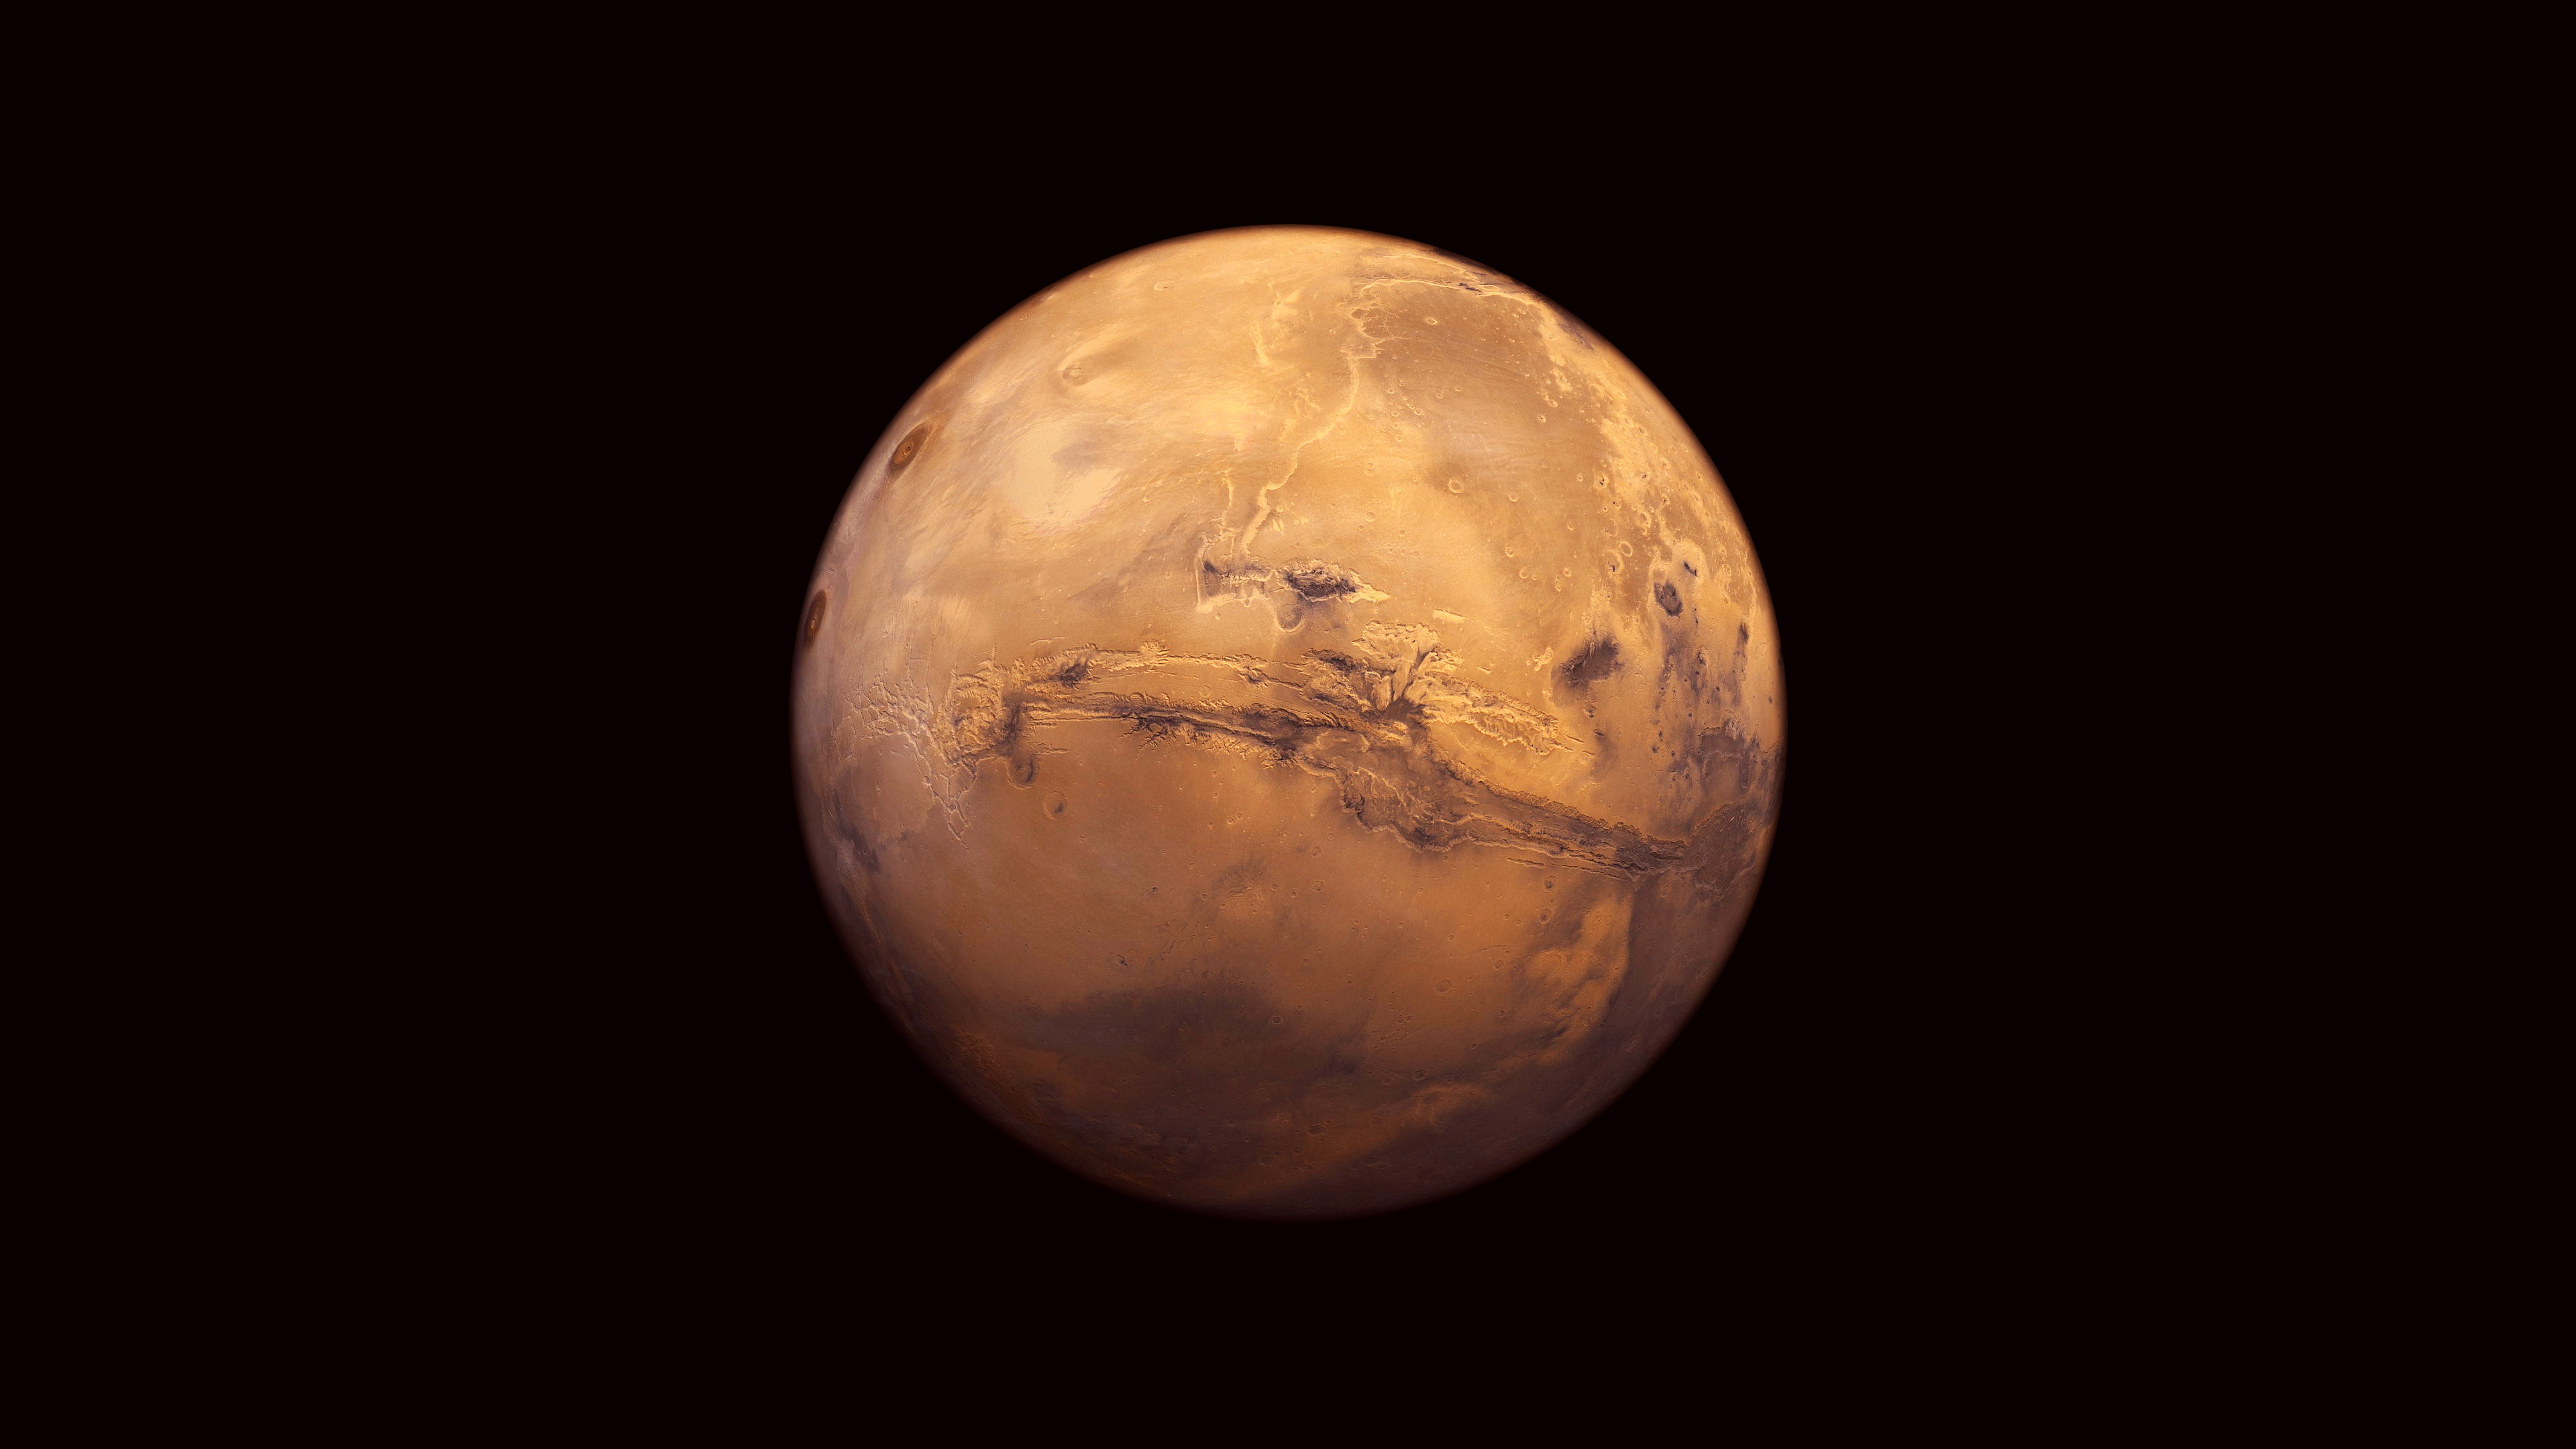 3840x2160 mars-high-resolution-wallpapers-cool-desktop-background-images-